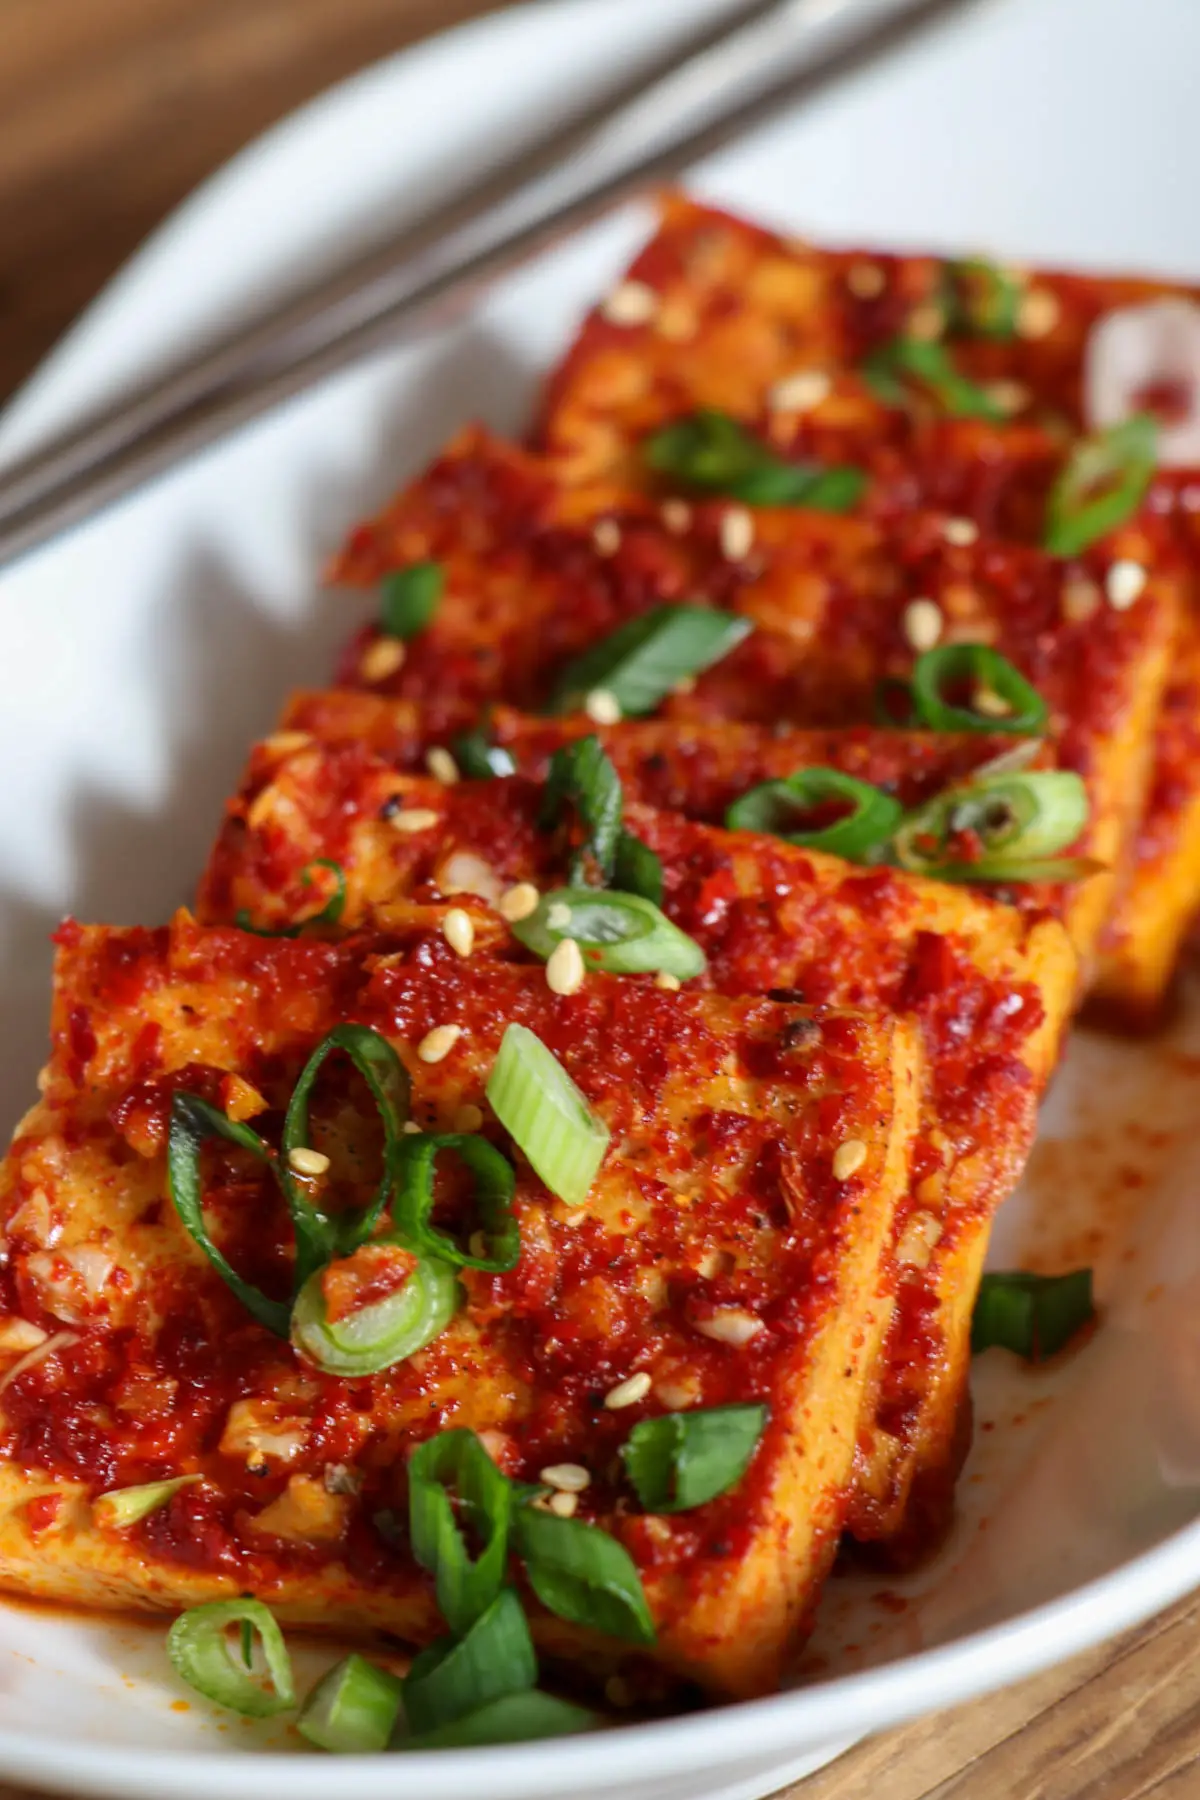 Slices of tofu coated in a spicy sauce garnished with green onions and sesame seeds in a white dish with silver chopsticks resting on the white dish.